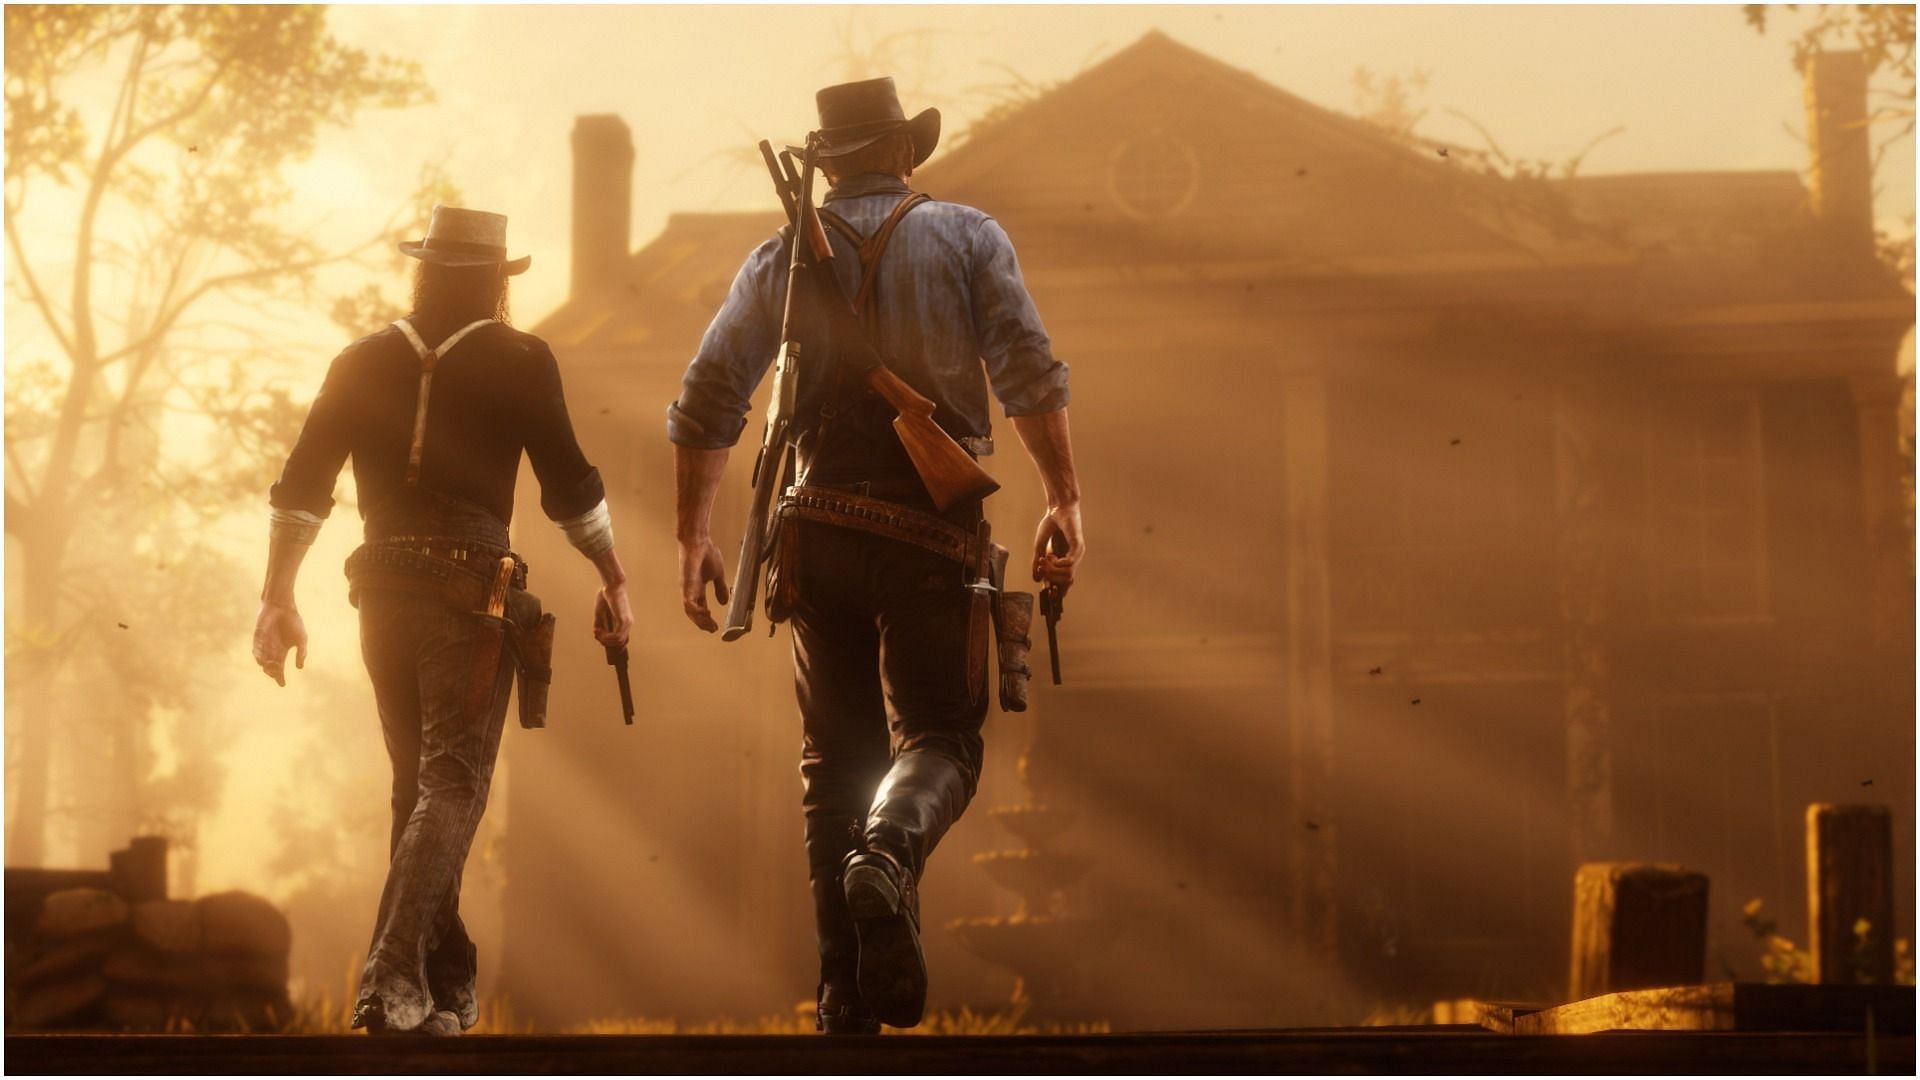 The two protagonists from the Red Dead Redemption series (Image via Rockstar Games)